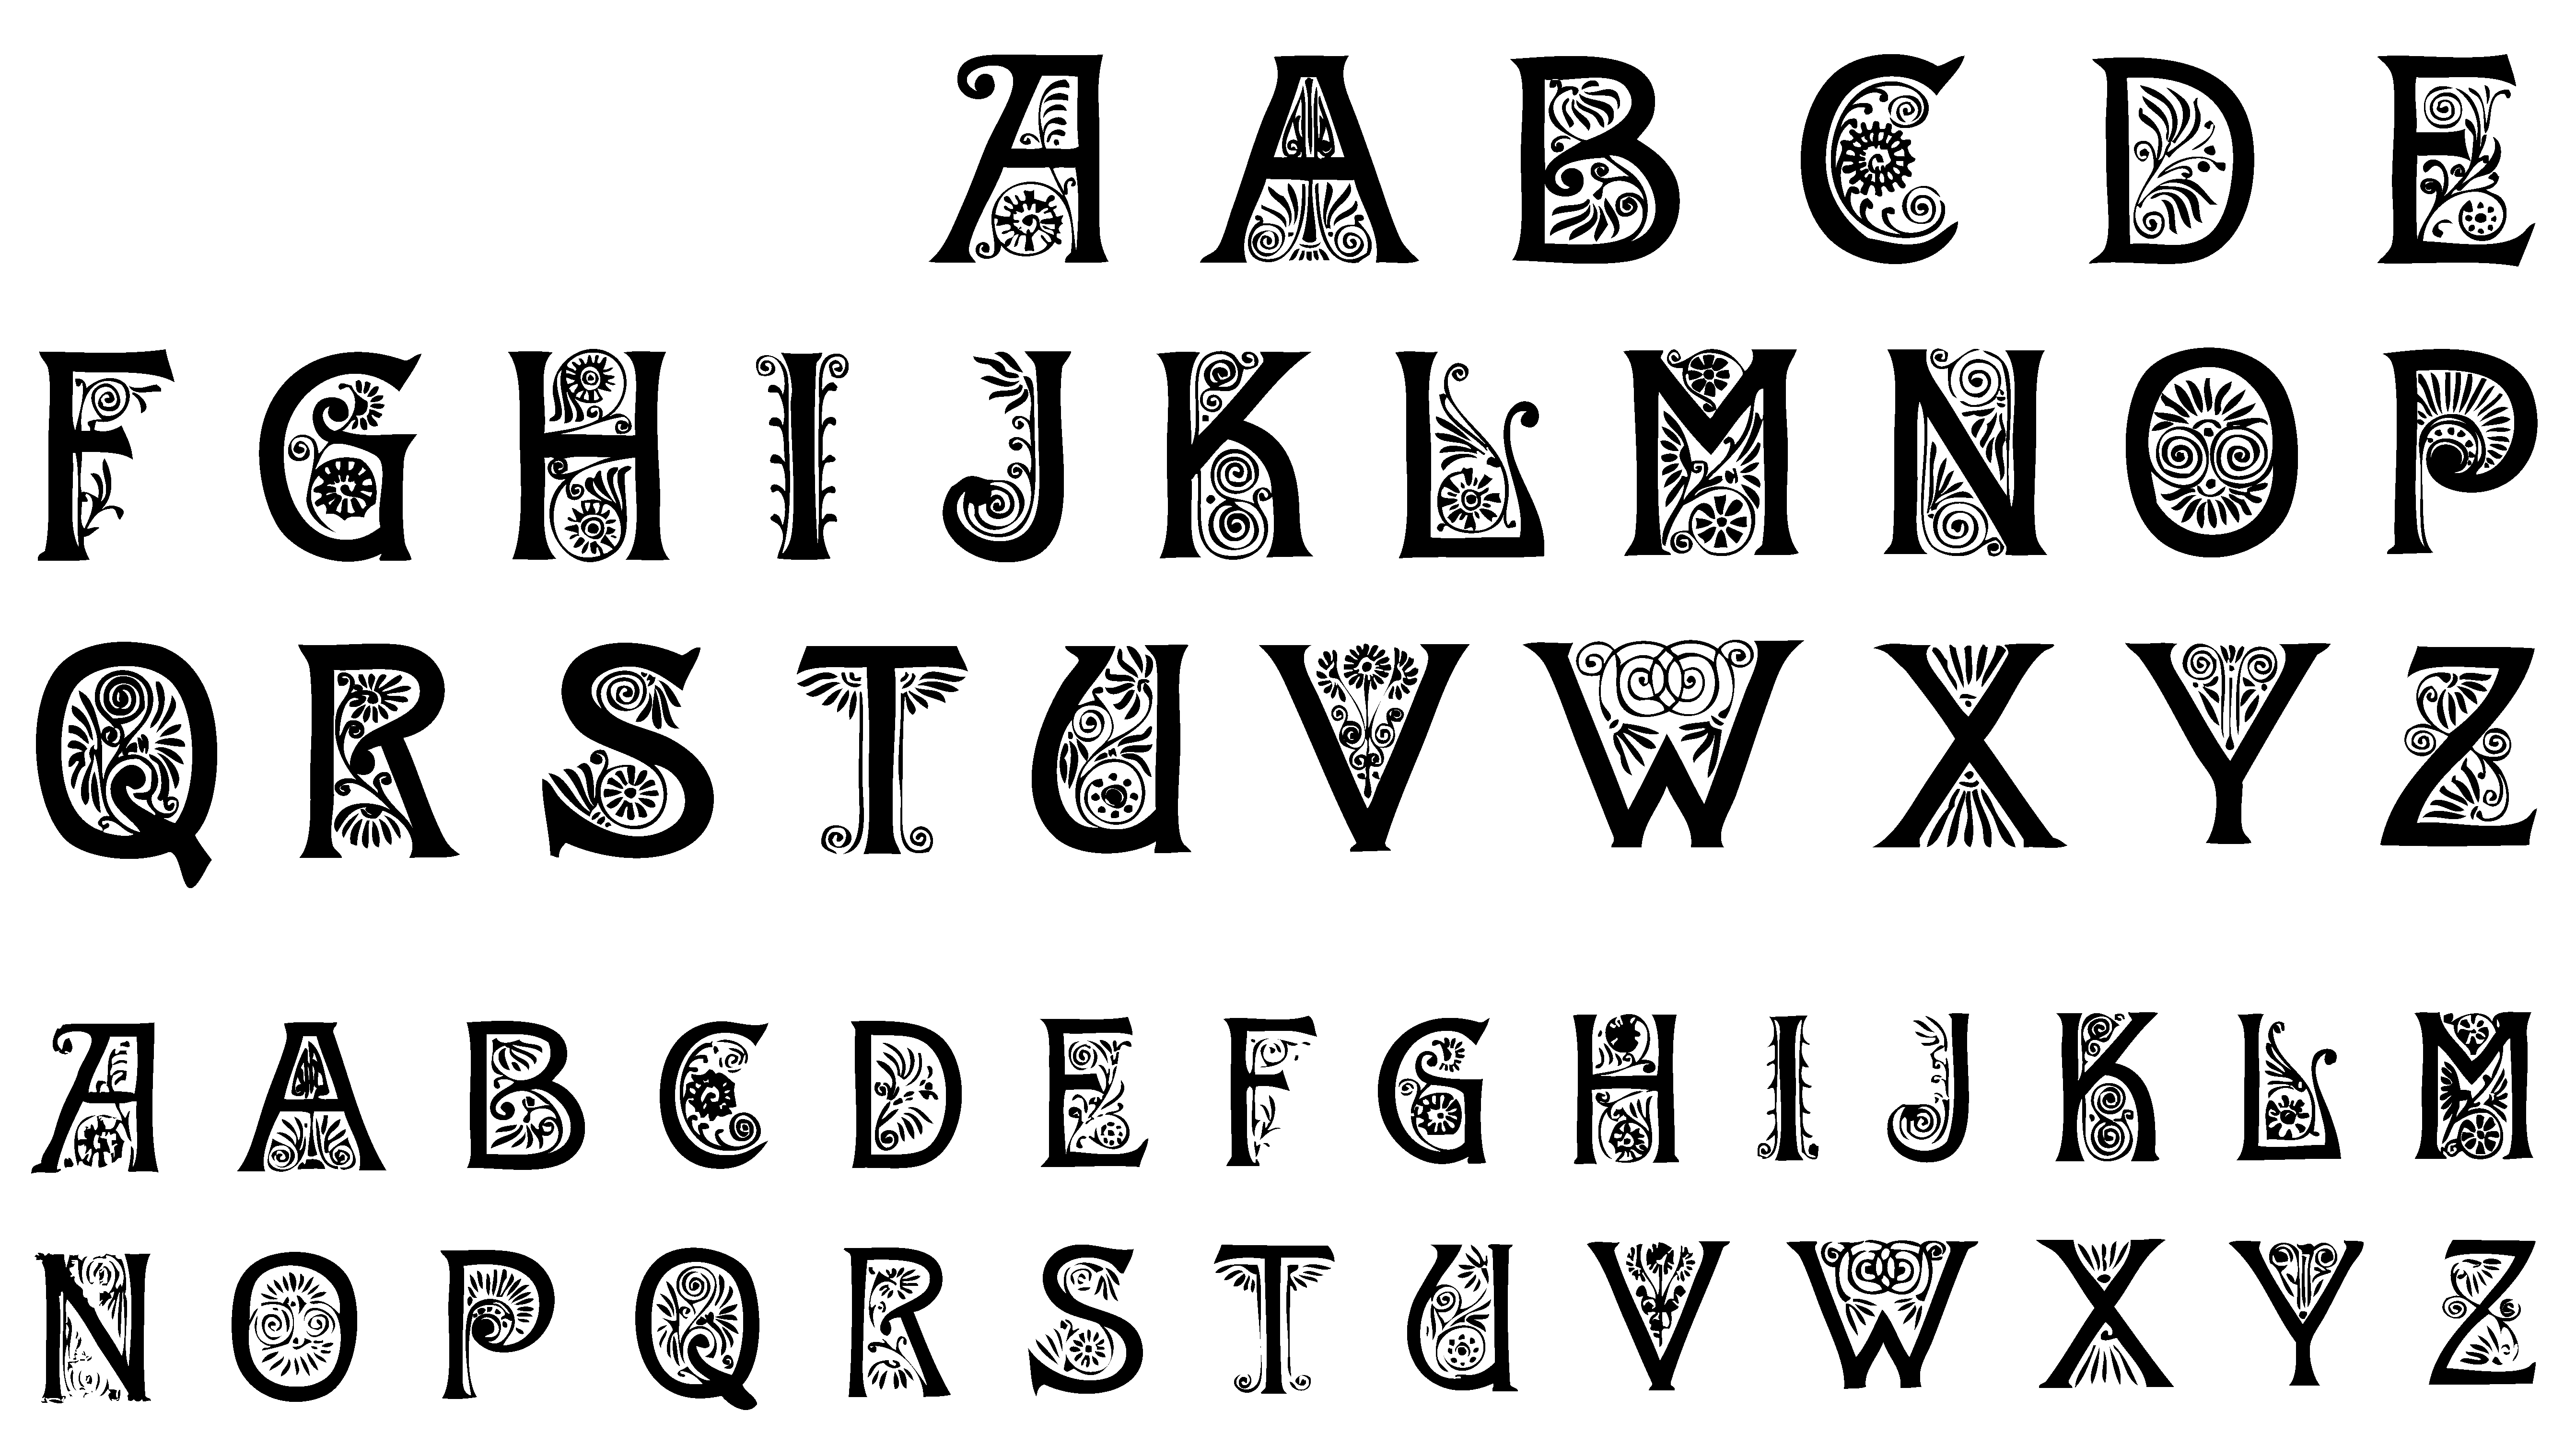 Free Fancy Letters Cliparts, Download Free Fancy Letters Cliparts